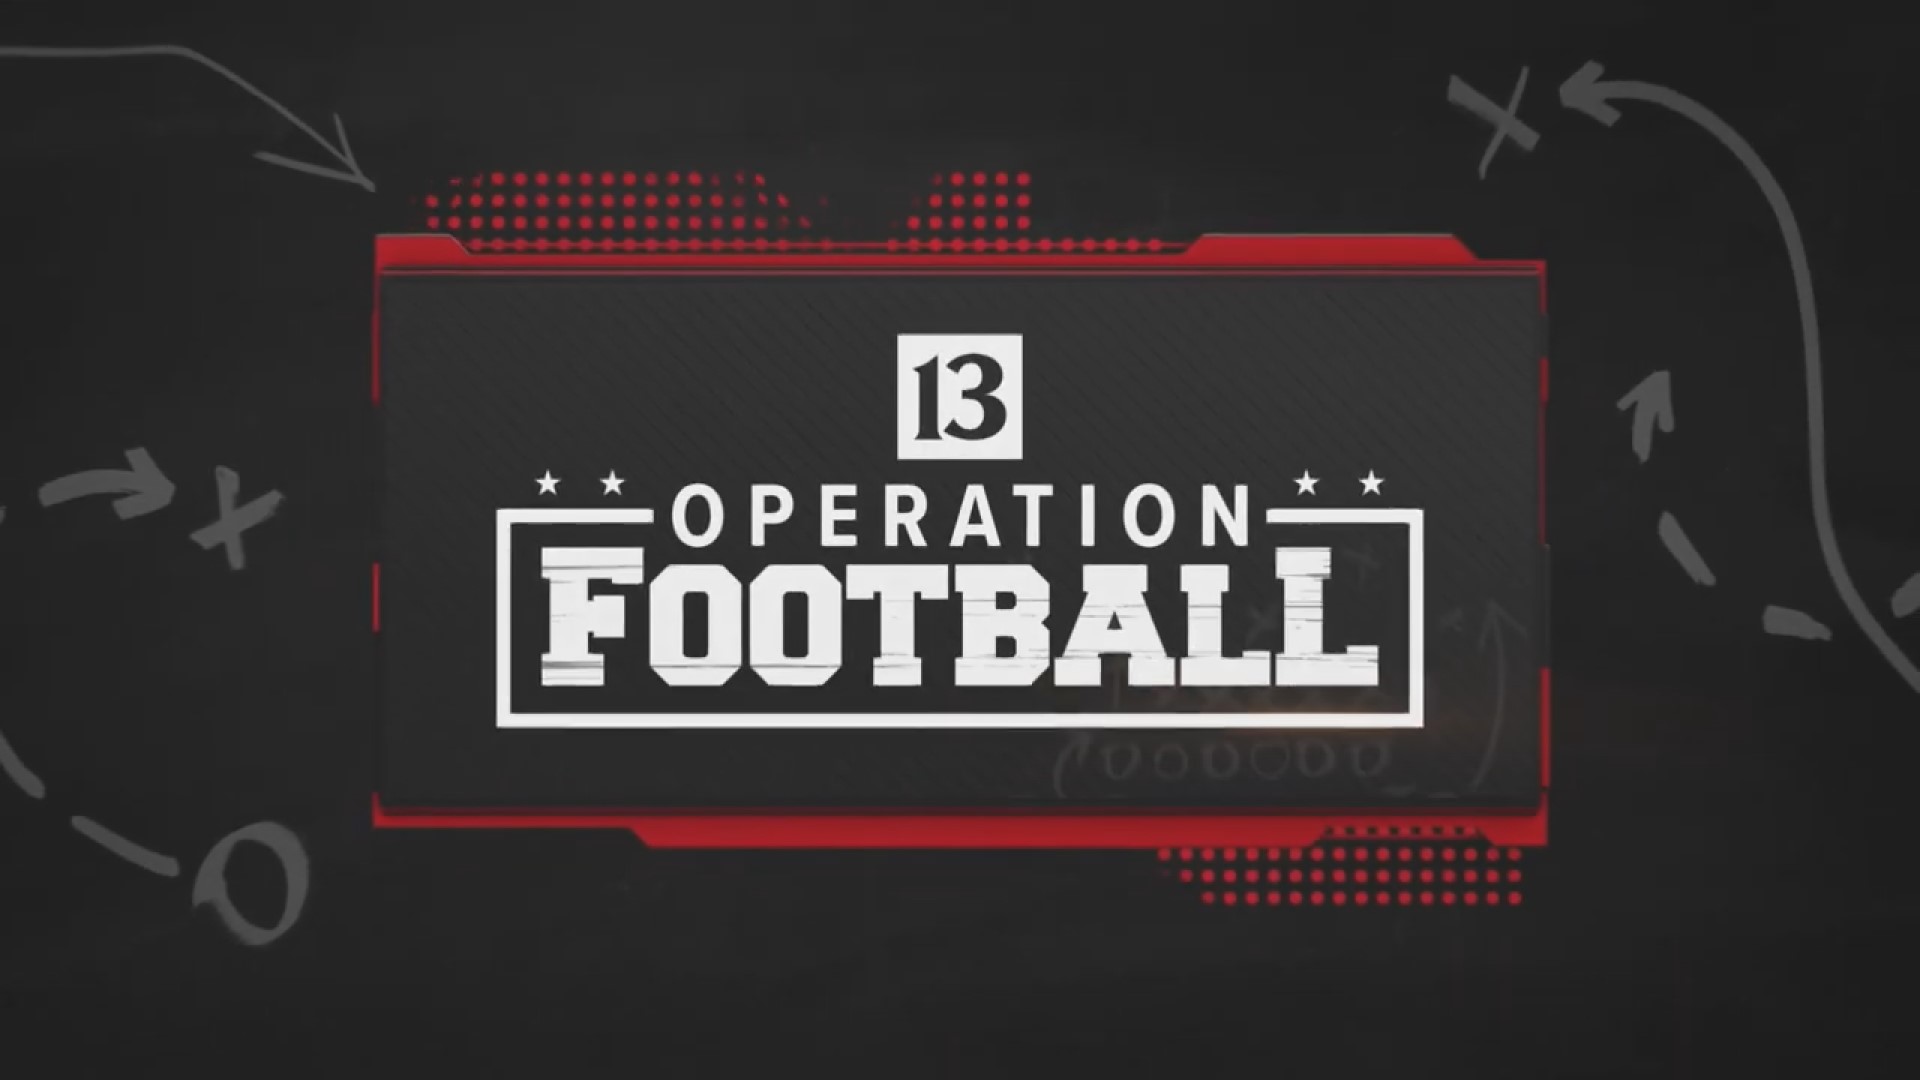 Here's a look at what you can expect in Week 7 of Operation Football.